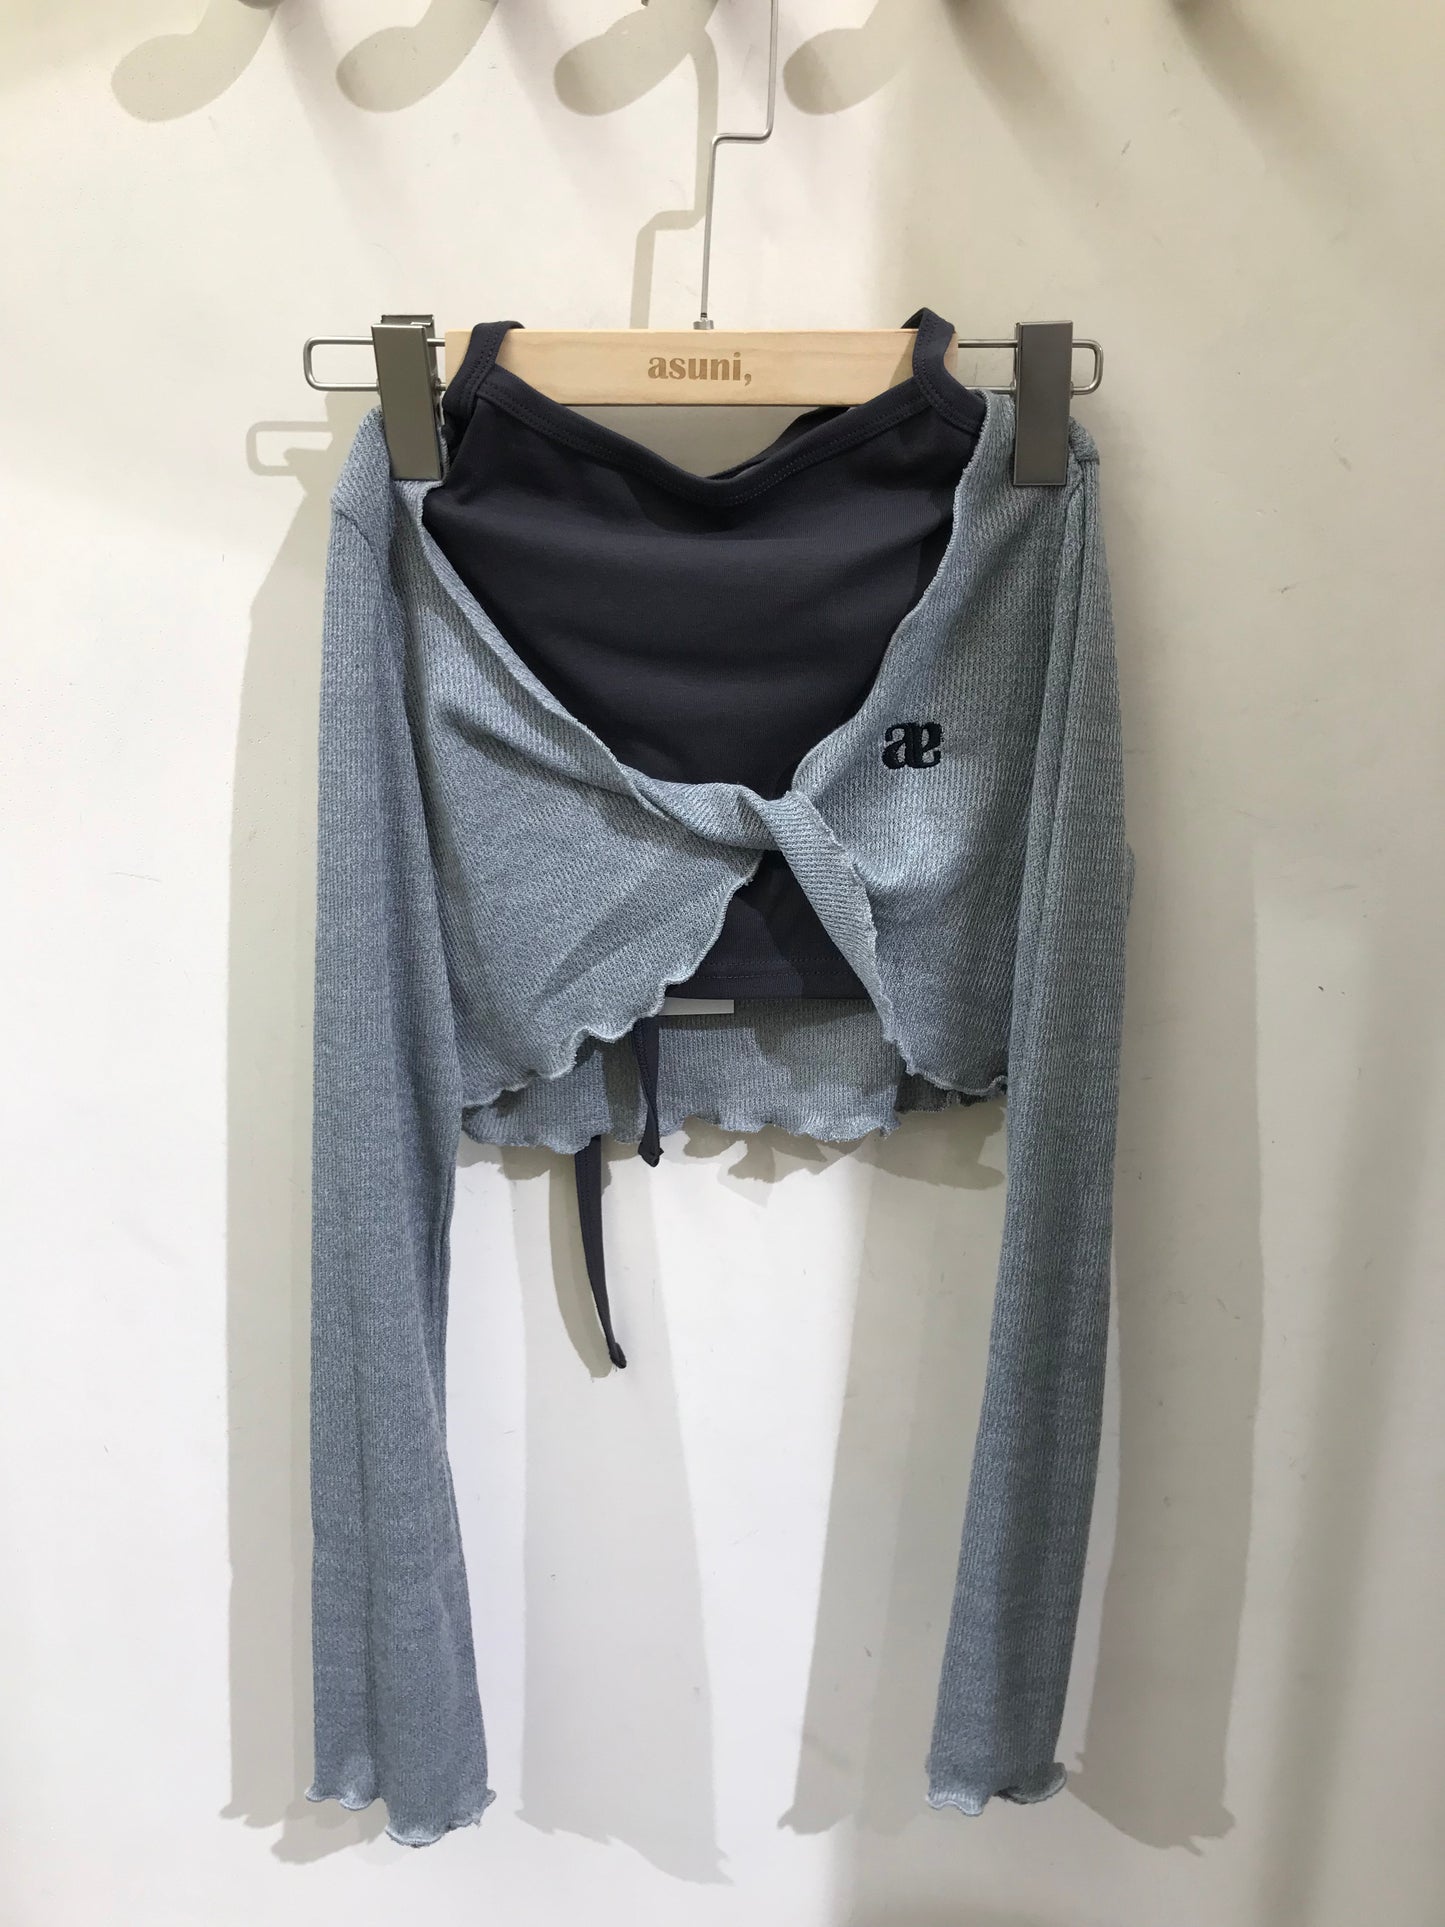 Double A logo tank with v-neck crop coat in grey